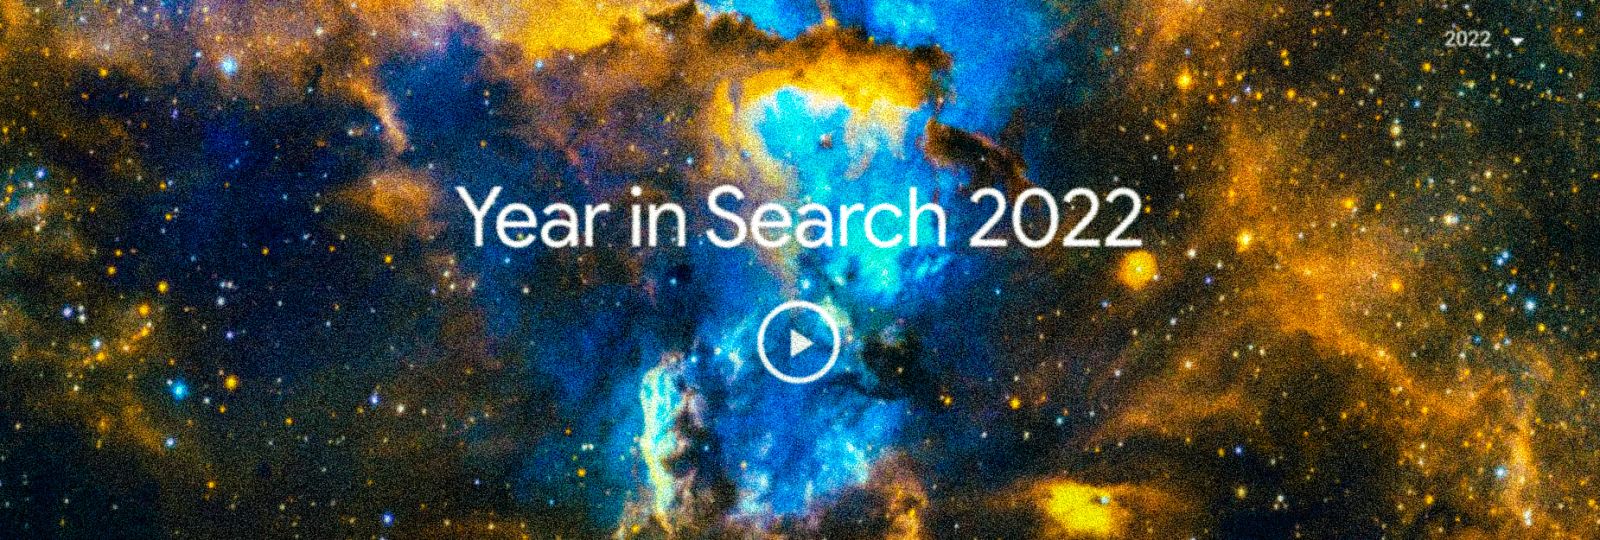 Google Search Trends in 2022